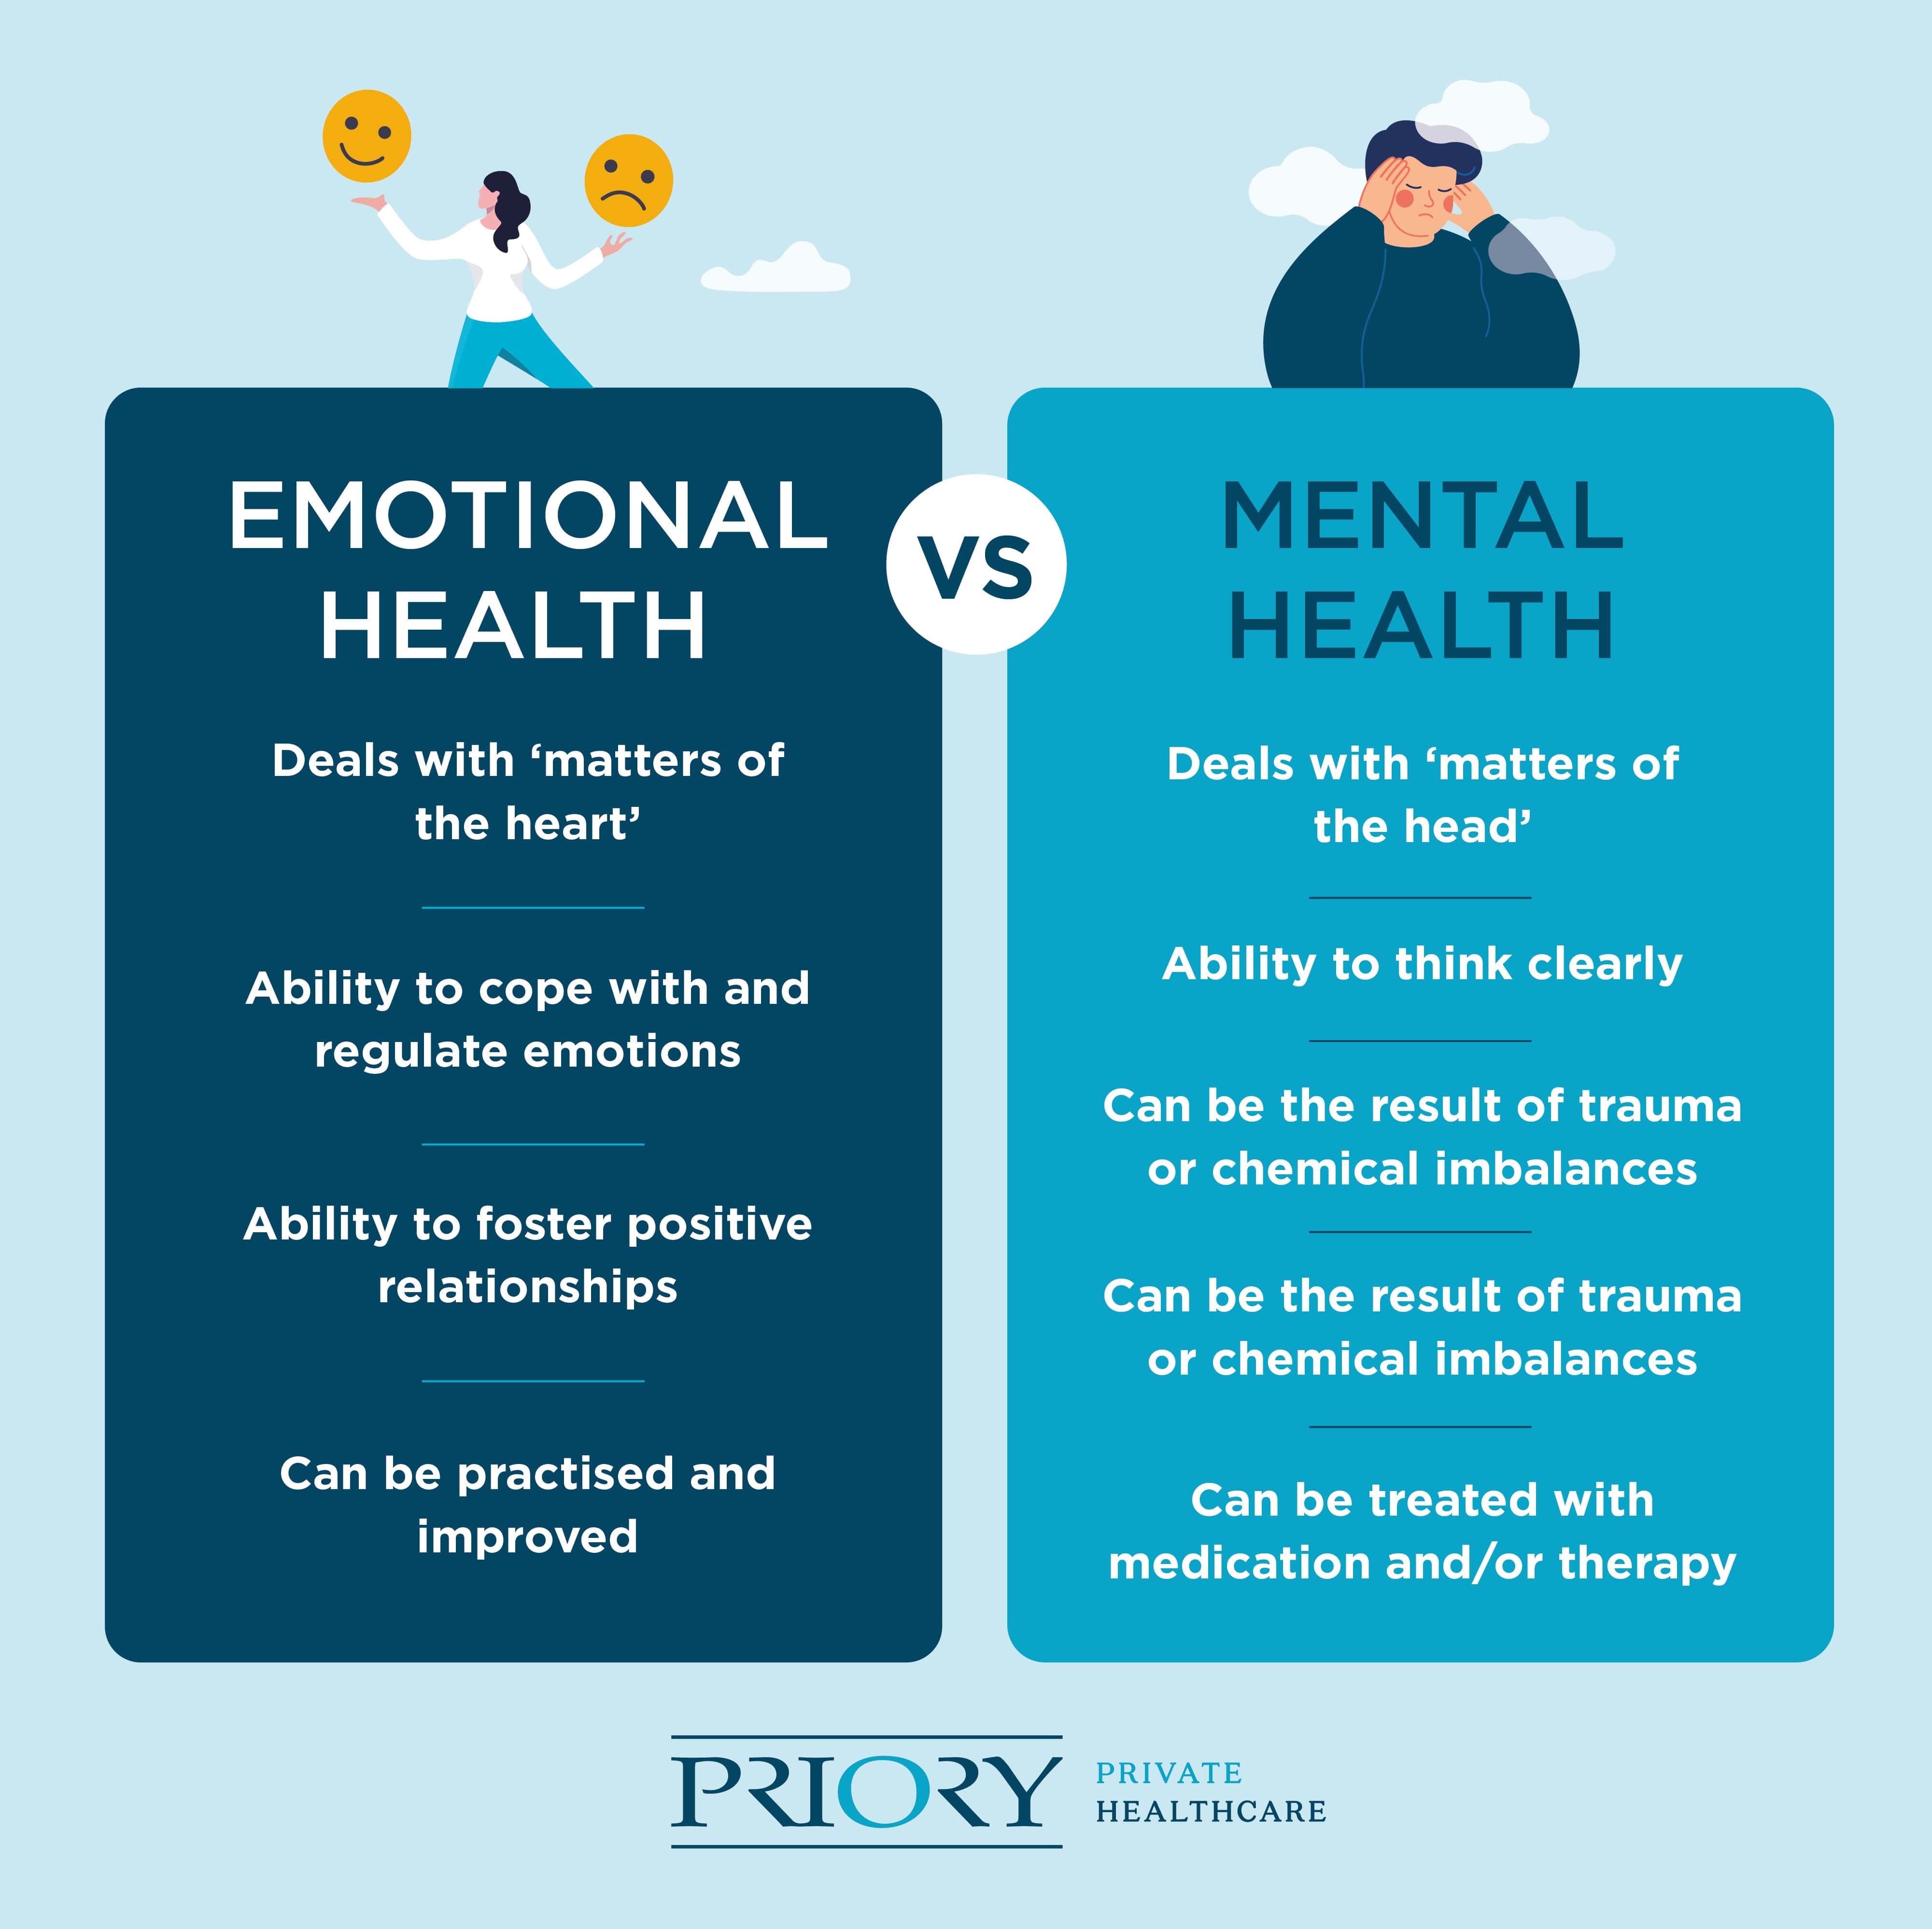 why is emotional health important?